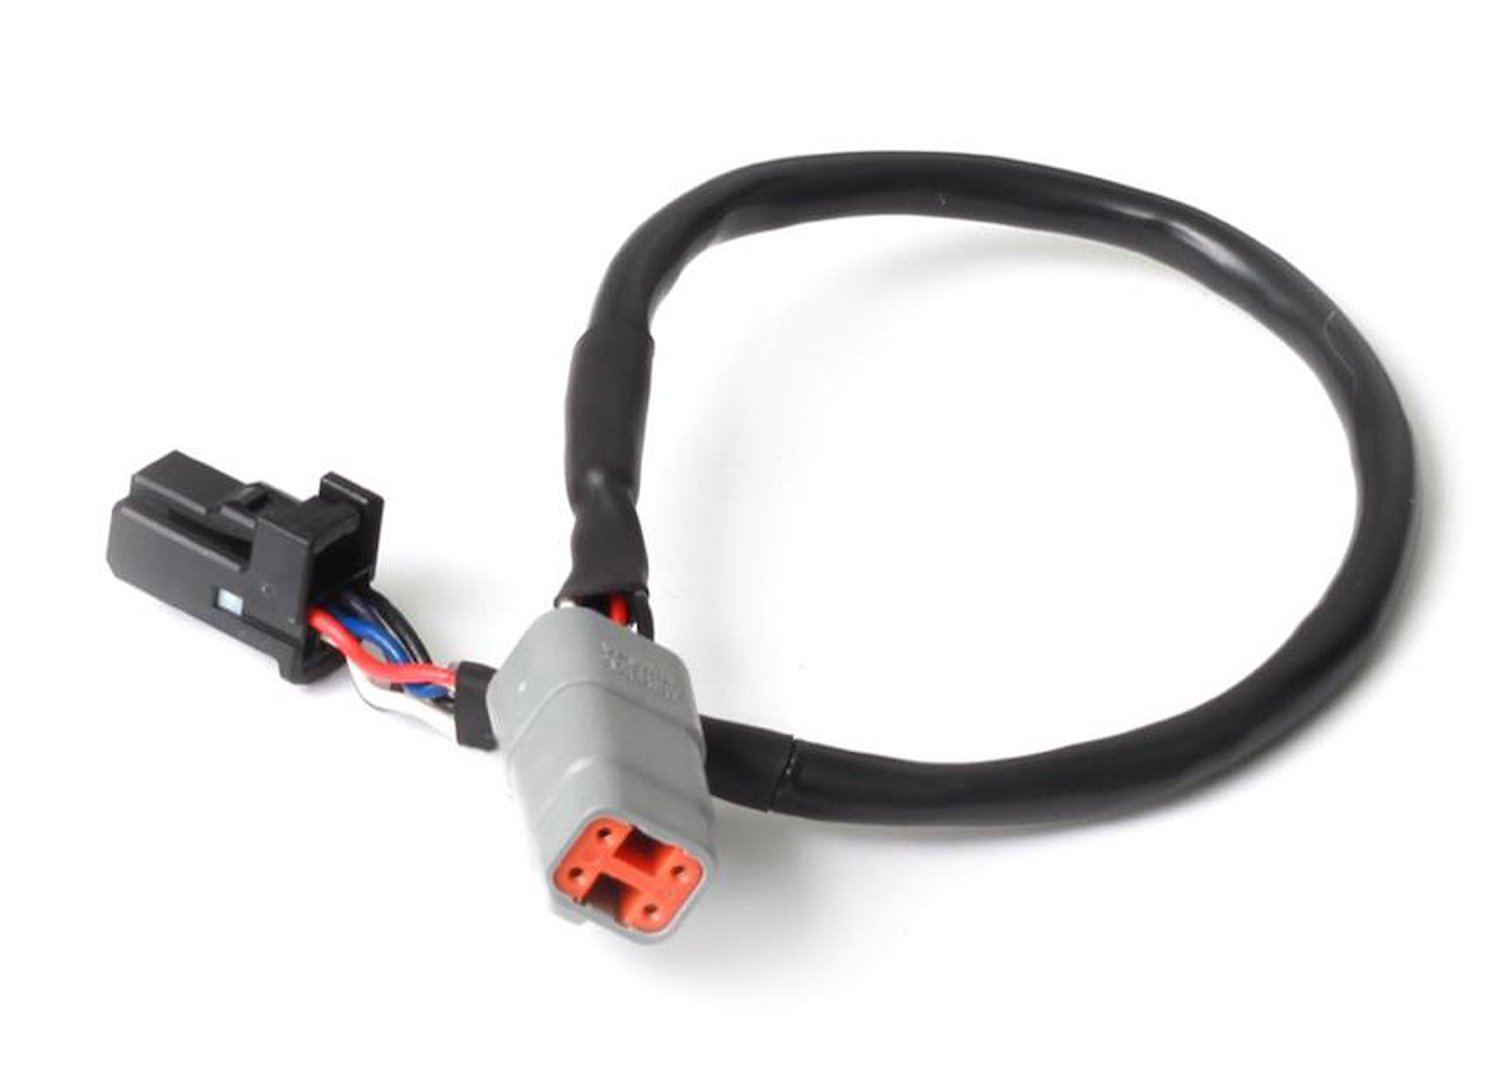 HT-130039 Elite CAN Cable, DTM-4, 8-Pin Black Tyco, 3600 mm (144 in.)